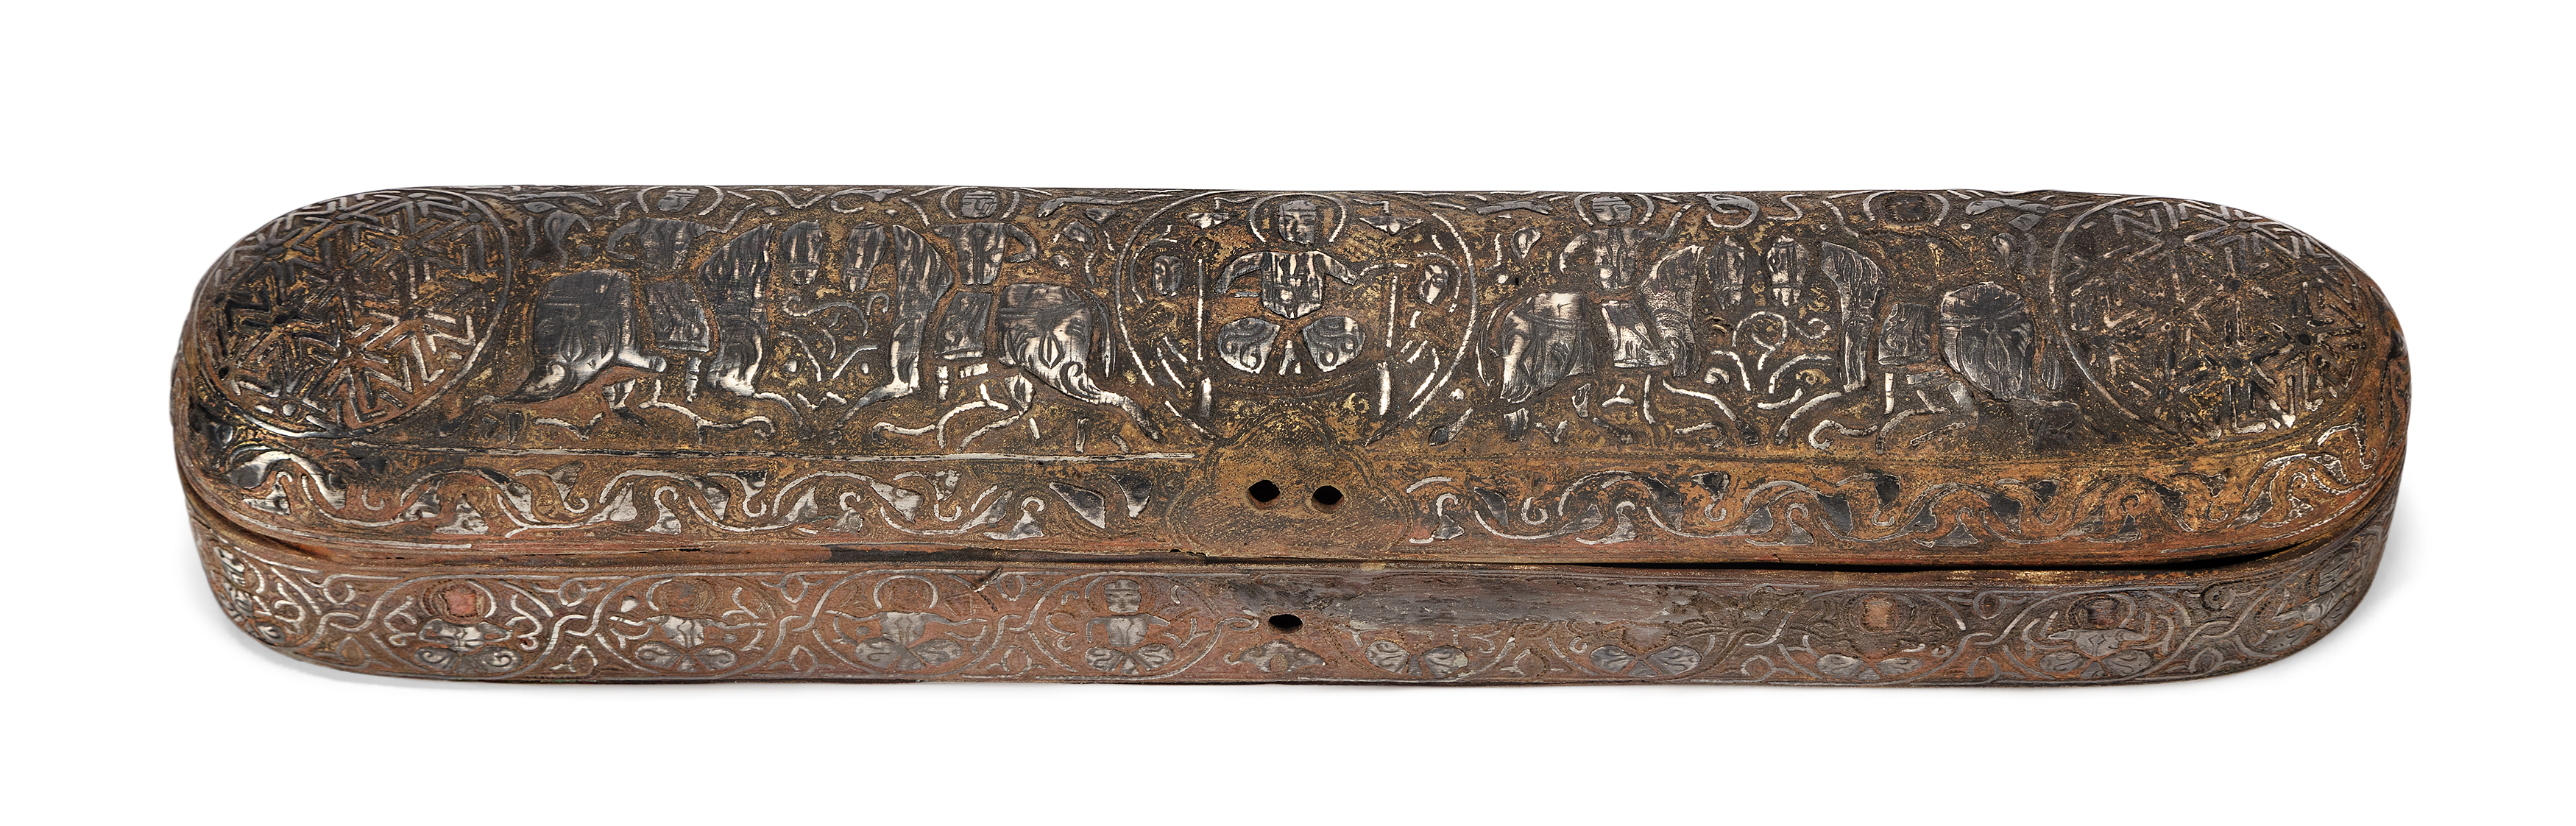 A figural silver-inlaid steel pen case, In the Seljuq-style, 20th century, The lid's central me...